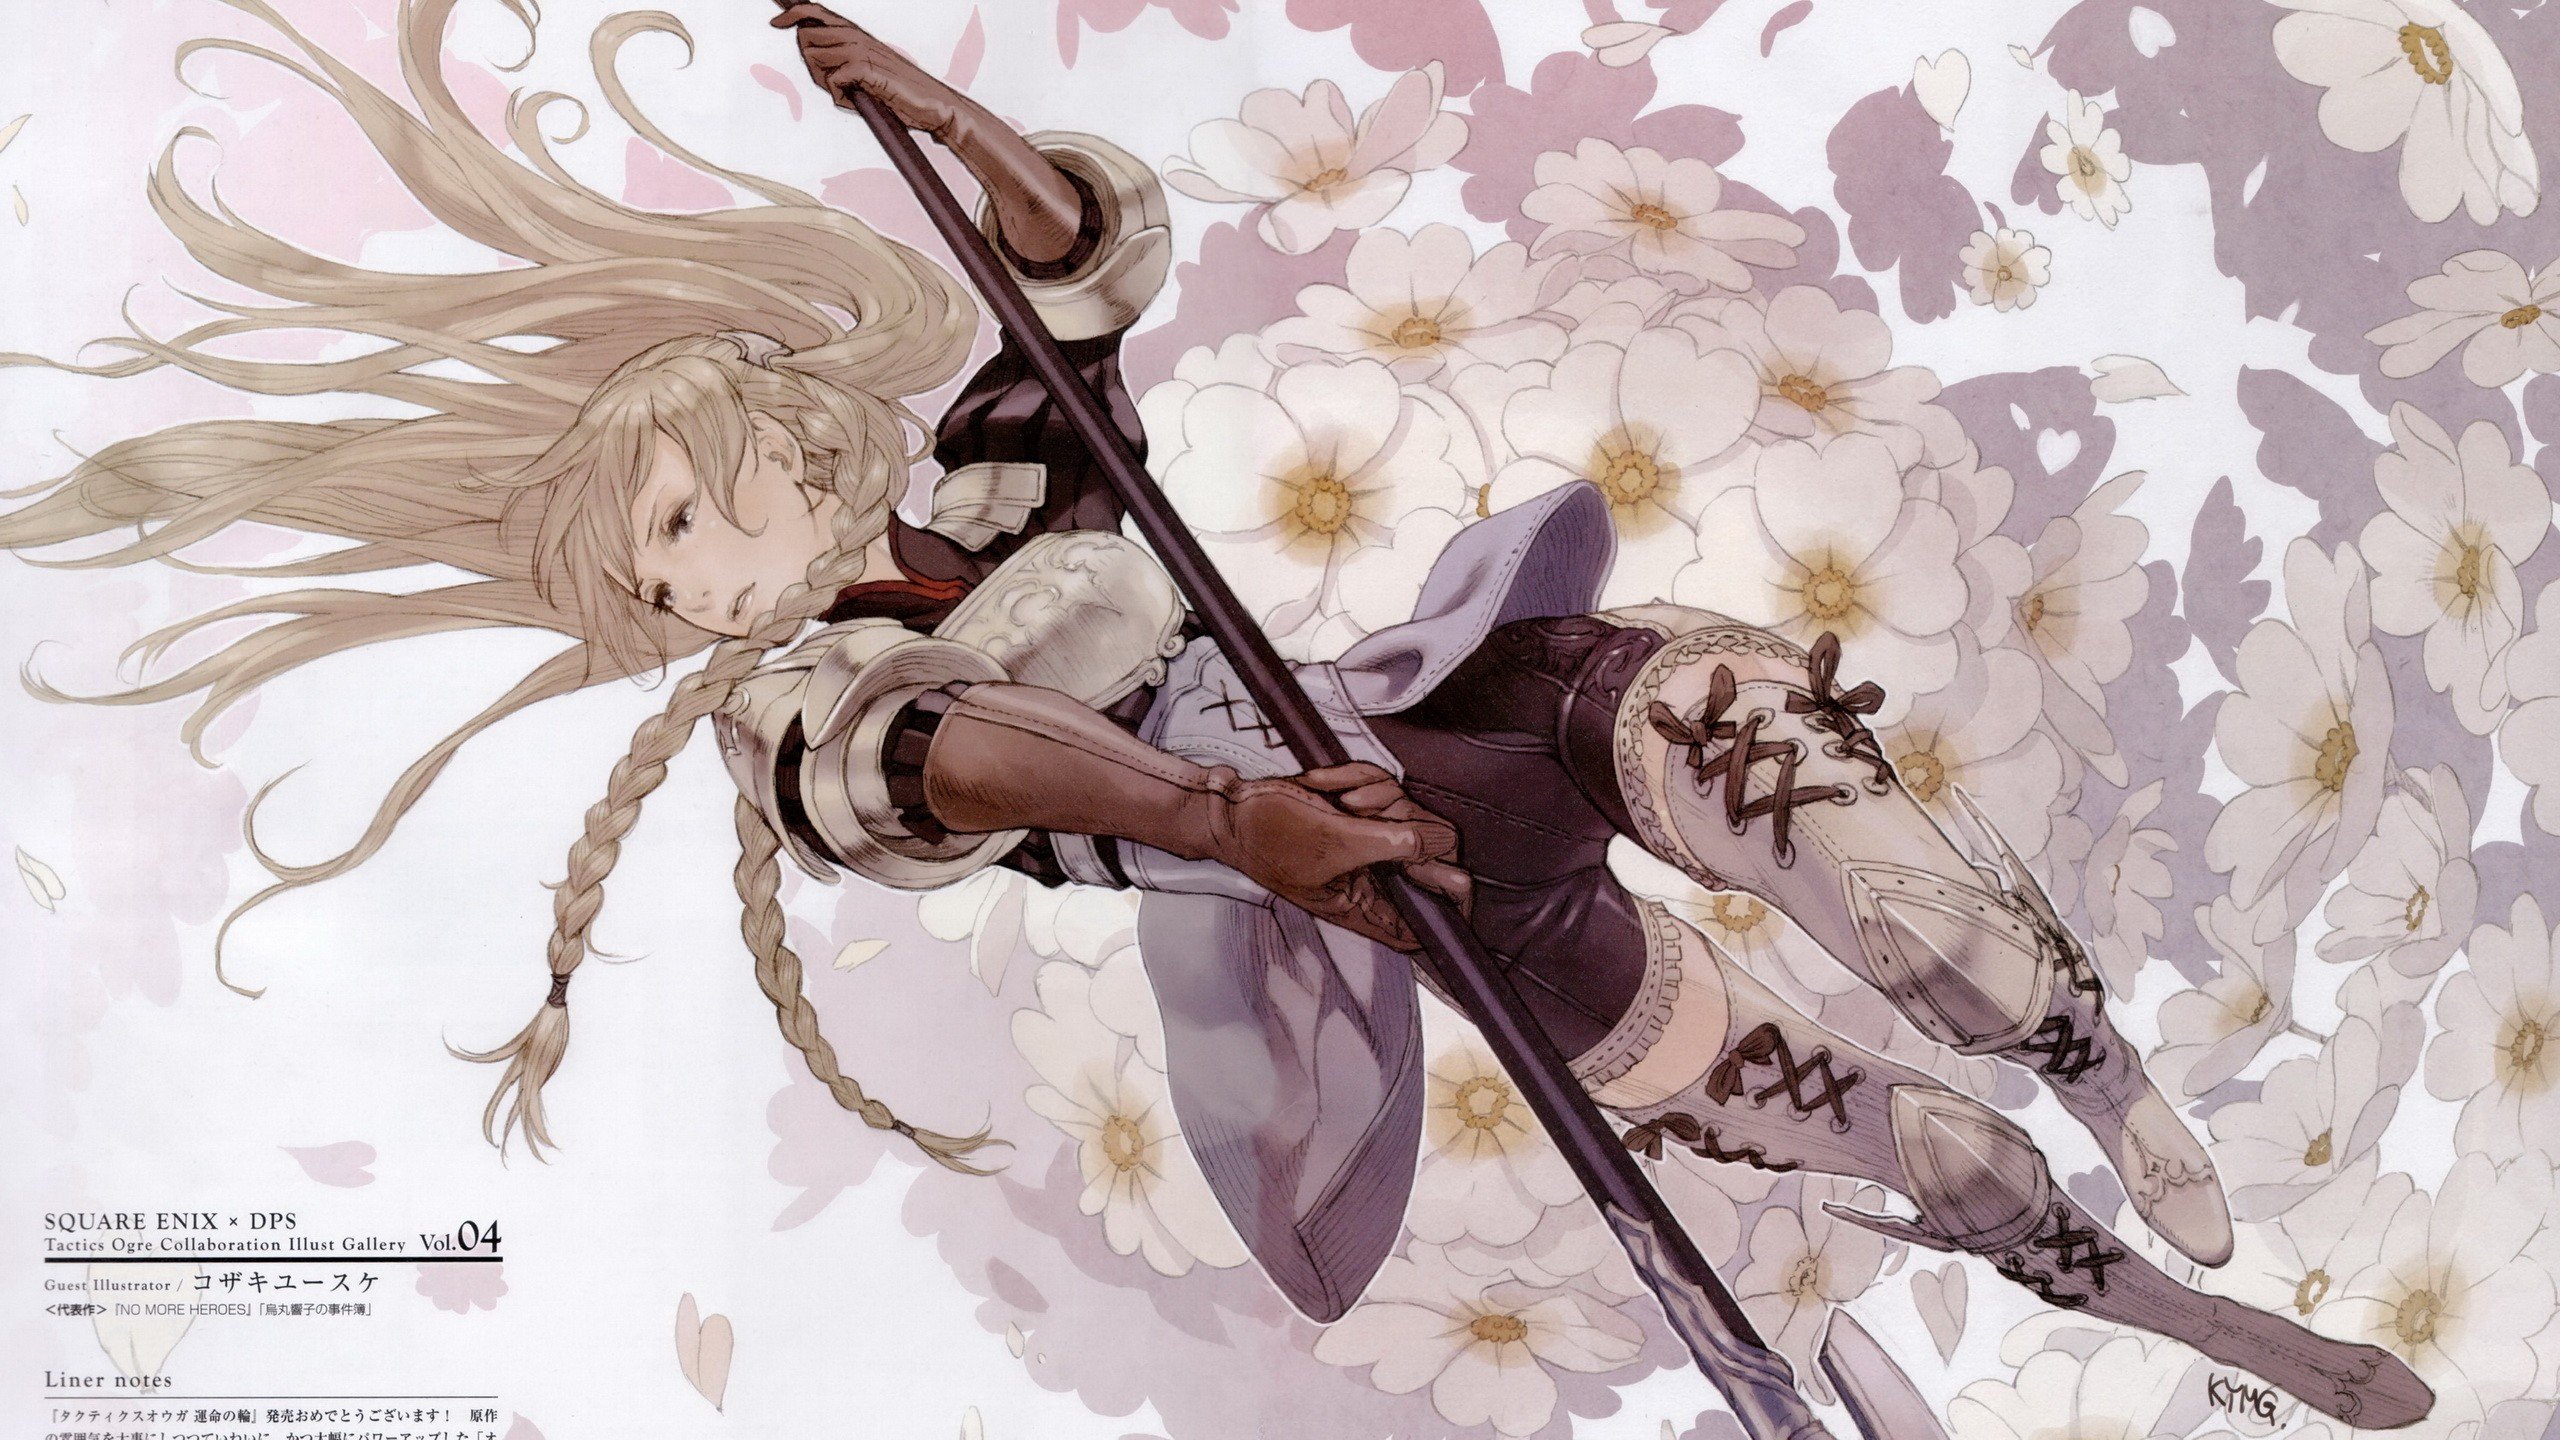 boots, Blondes, Women, Video, Games, Gloves, Flowers, Stockings, Long, Hair, Weapons, Blossoms, Armor, Thigh, Highs, Warriors, Spears, Braids, Hair, Ornaments, Bangs, Fighters, Tactics, Ogre, Ravness, Loxaerion, Wallpaper